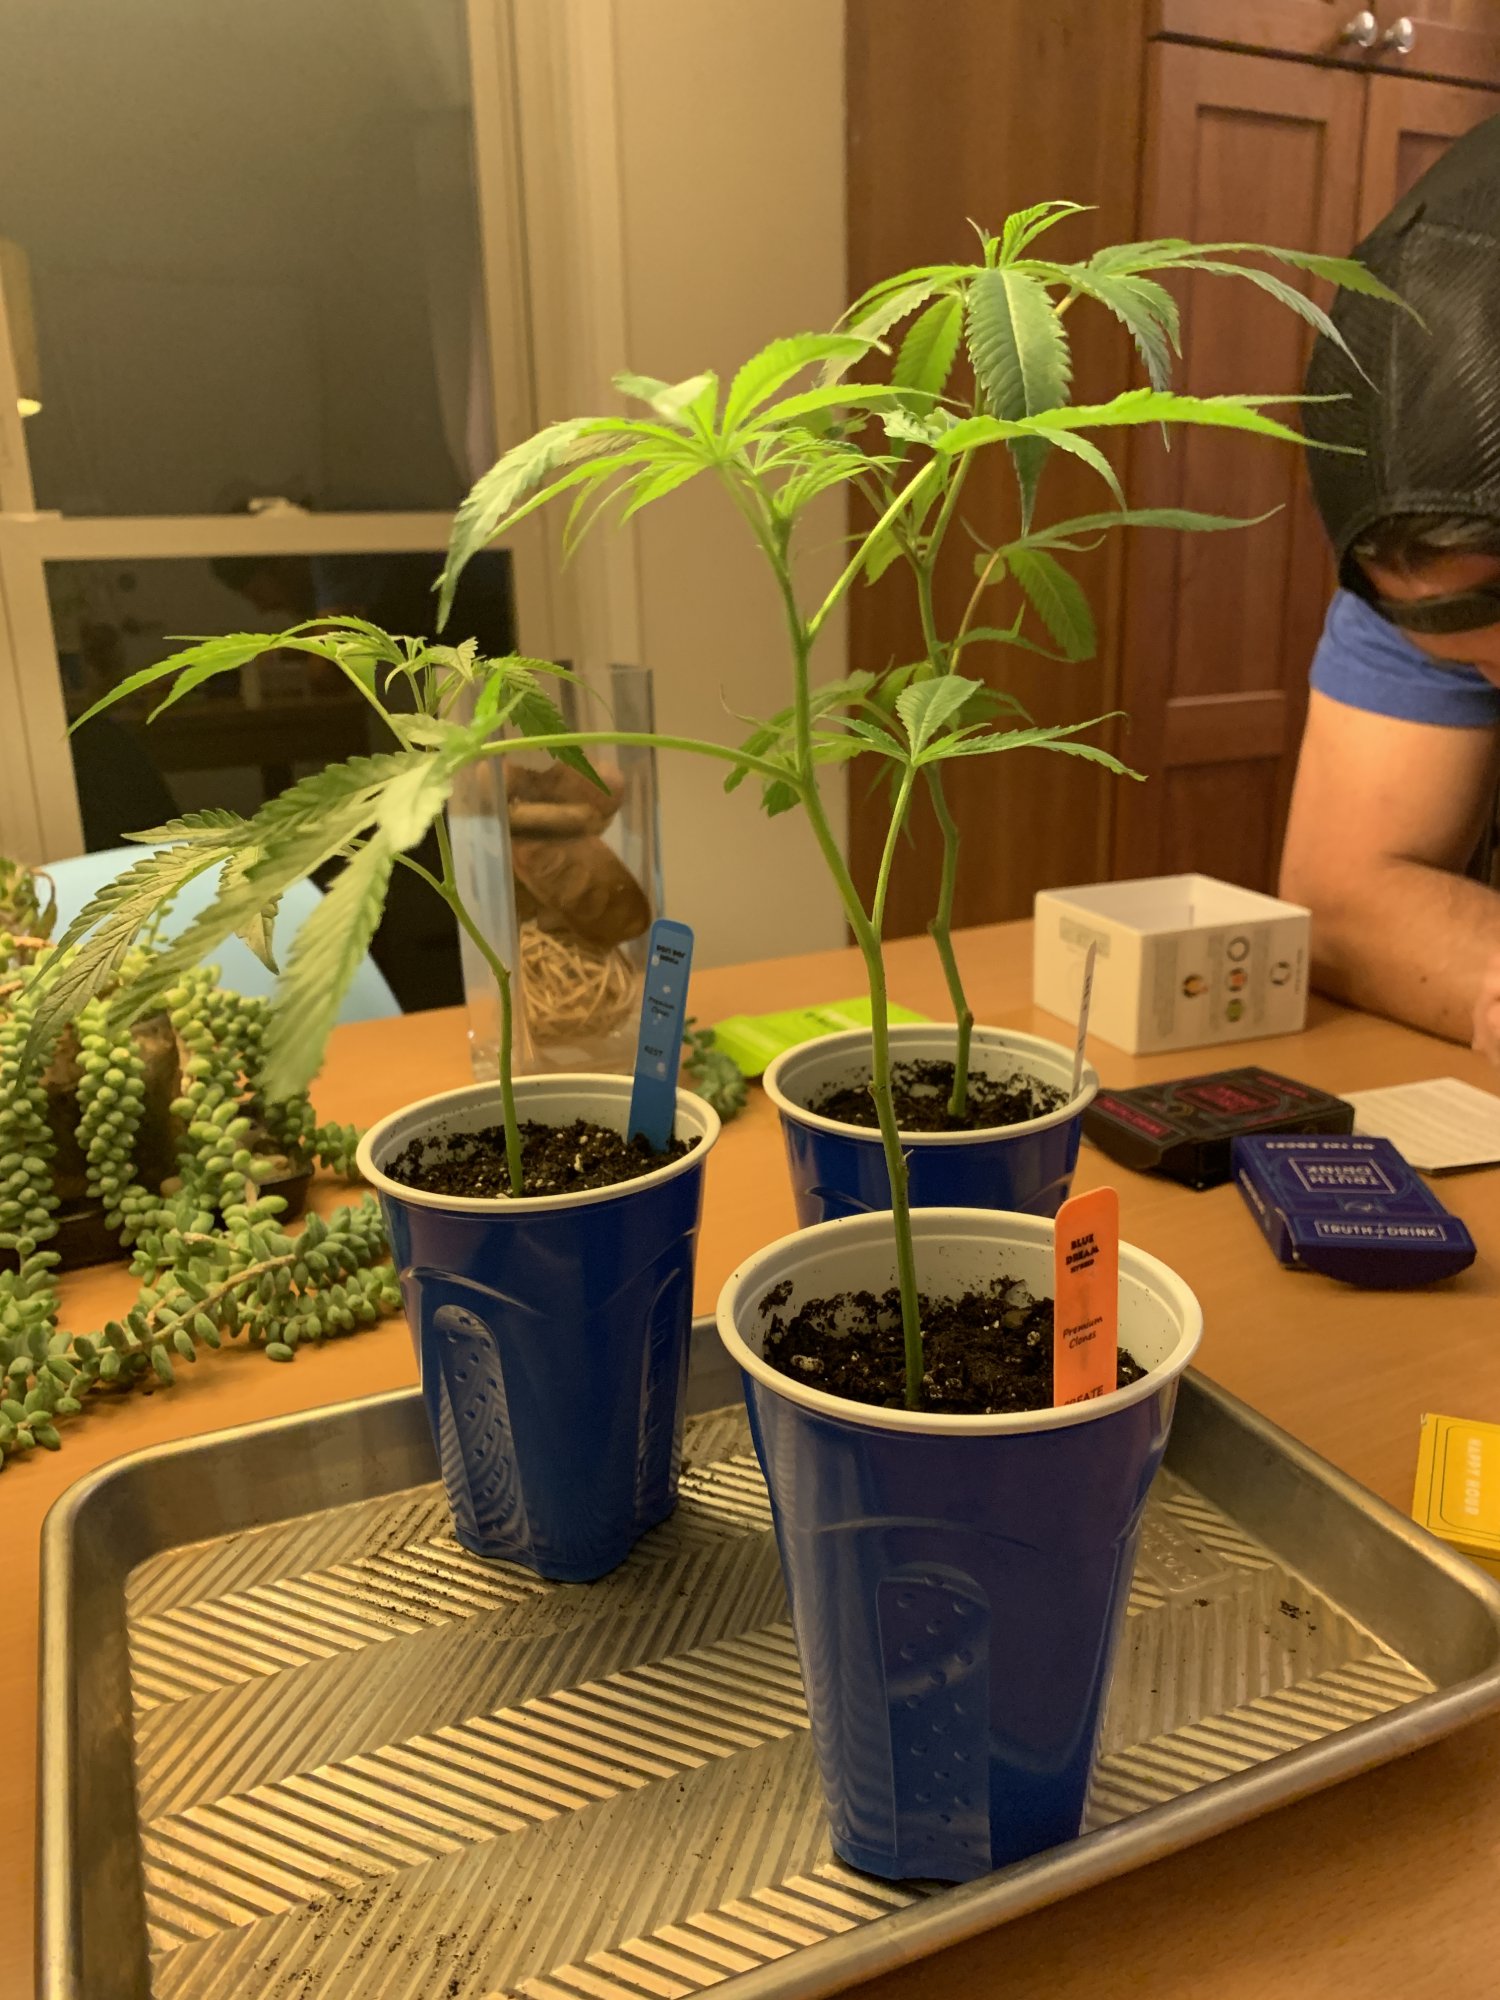 Asking for a little help for a new grower 2